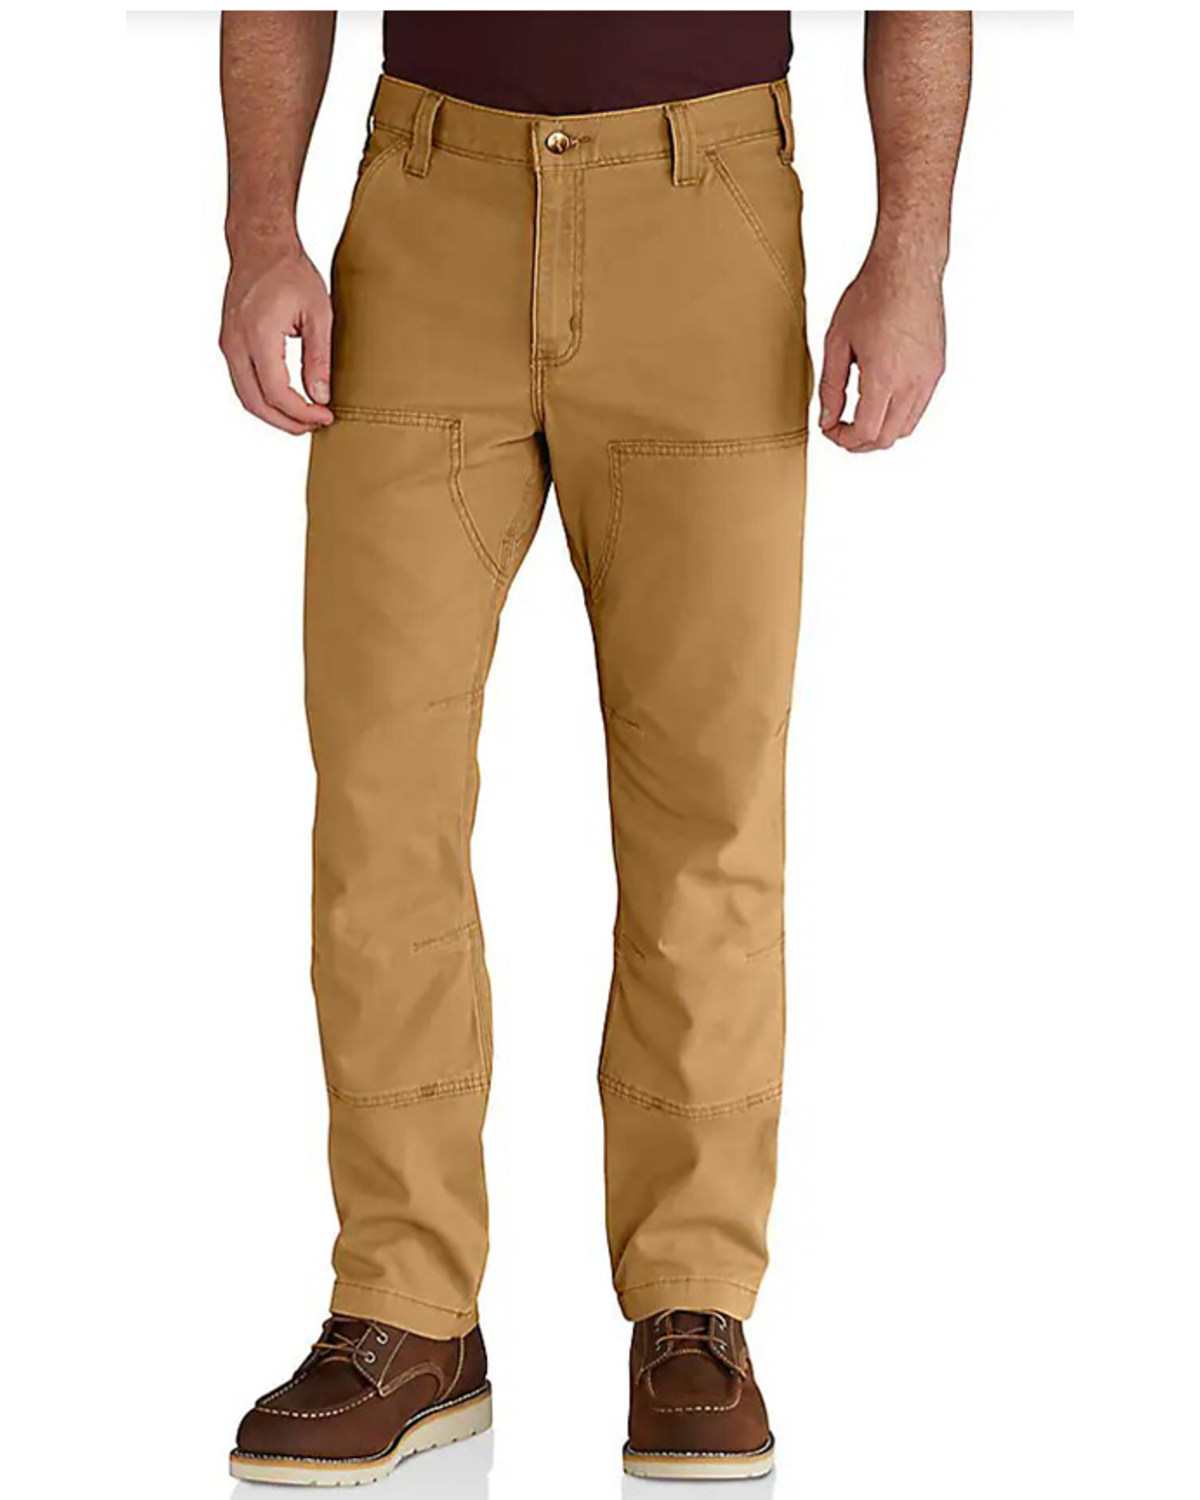 Carhartt Men's Rugged Flex Rigby Double-Front Straight Utility Work Pants